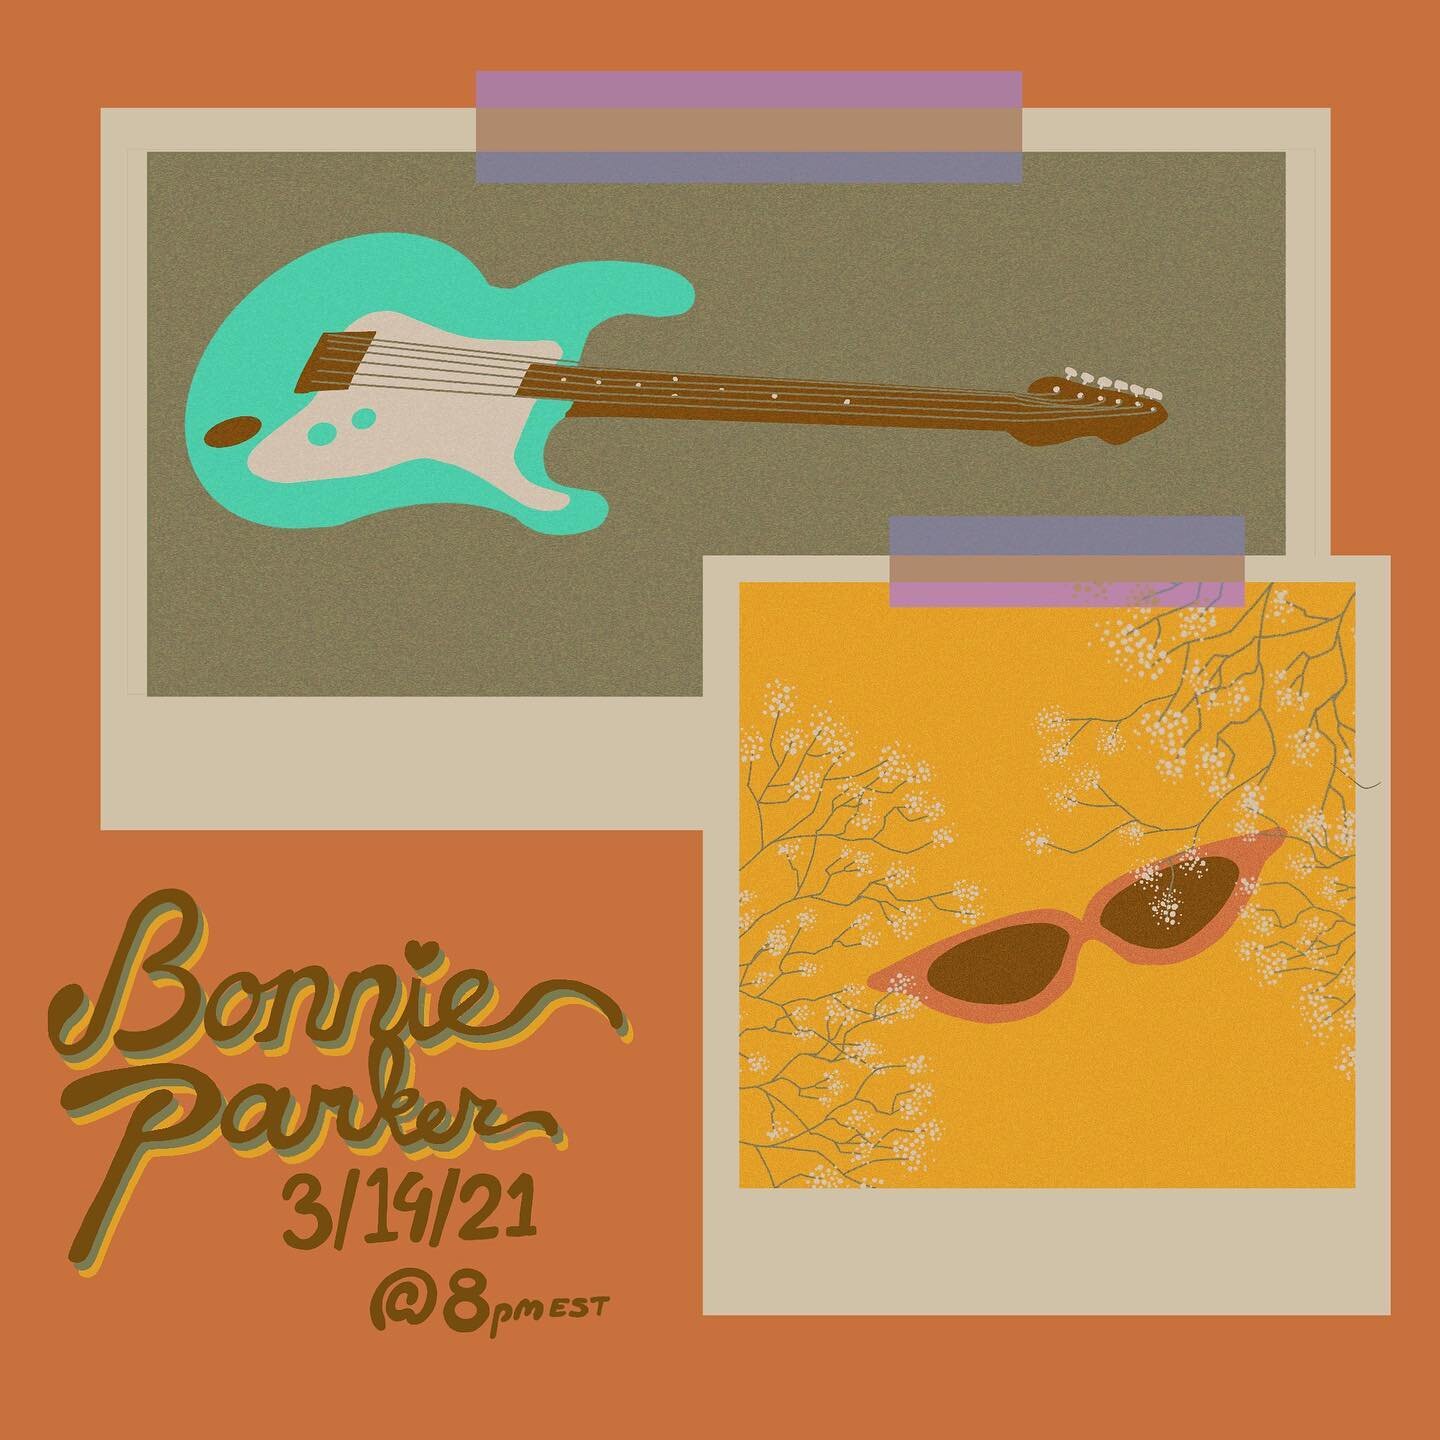 Catch @bonnieisanactress LIVE on WECB&rsquo;s InstaGram 3/19 at 8PM EST! 

Graphic by @zindipity 

Alt Text:

Two Polaroids (one with a blue &amp; white guitar, other with brown sunglasses on a yellow background); [TEXT READS: BONNIE PARKER 3/19/21 8PM EST]